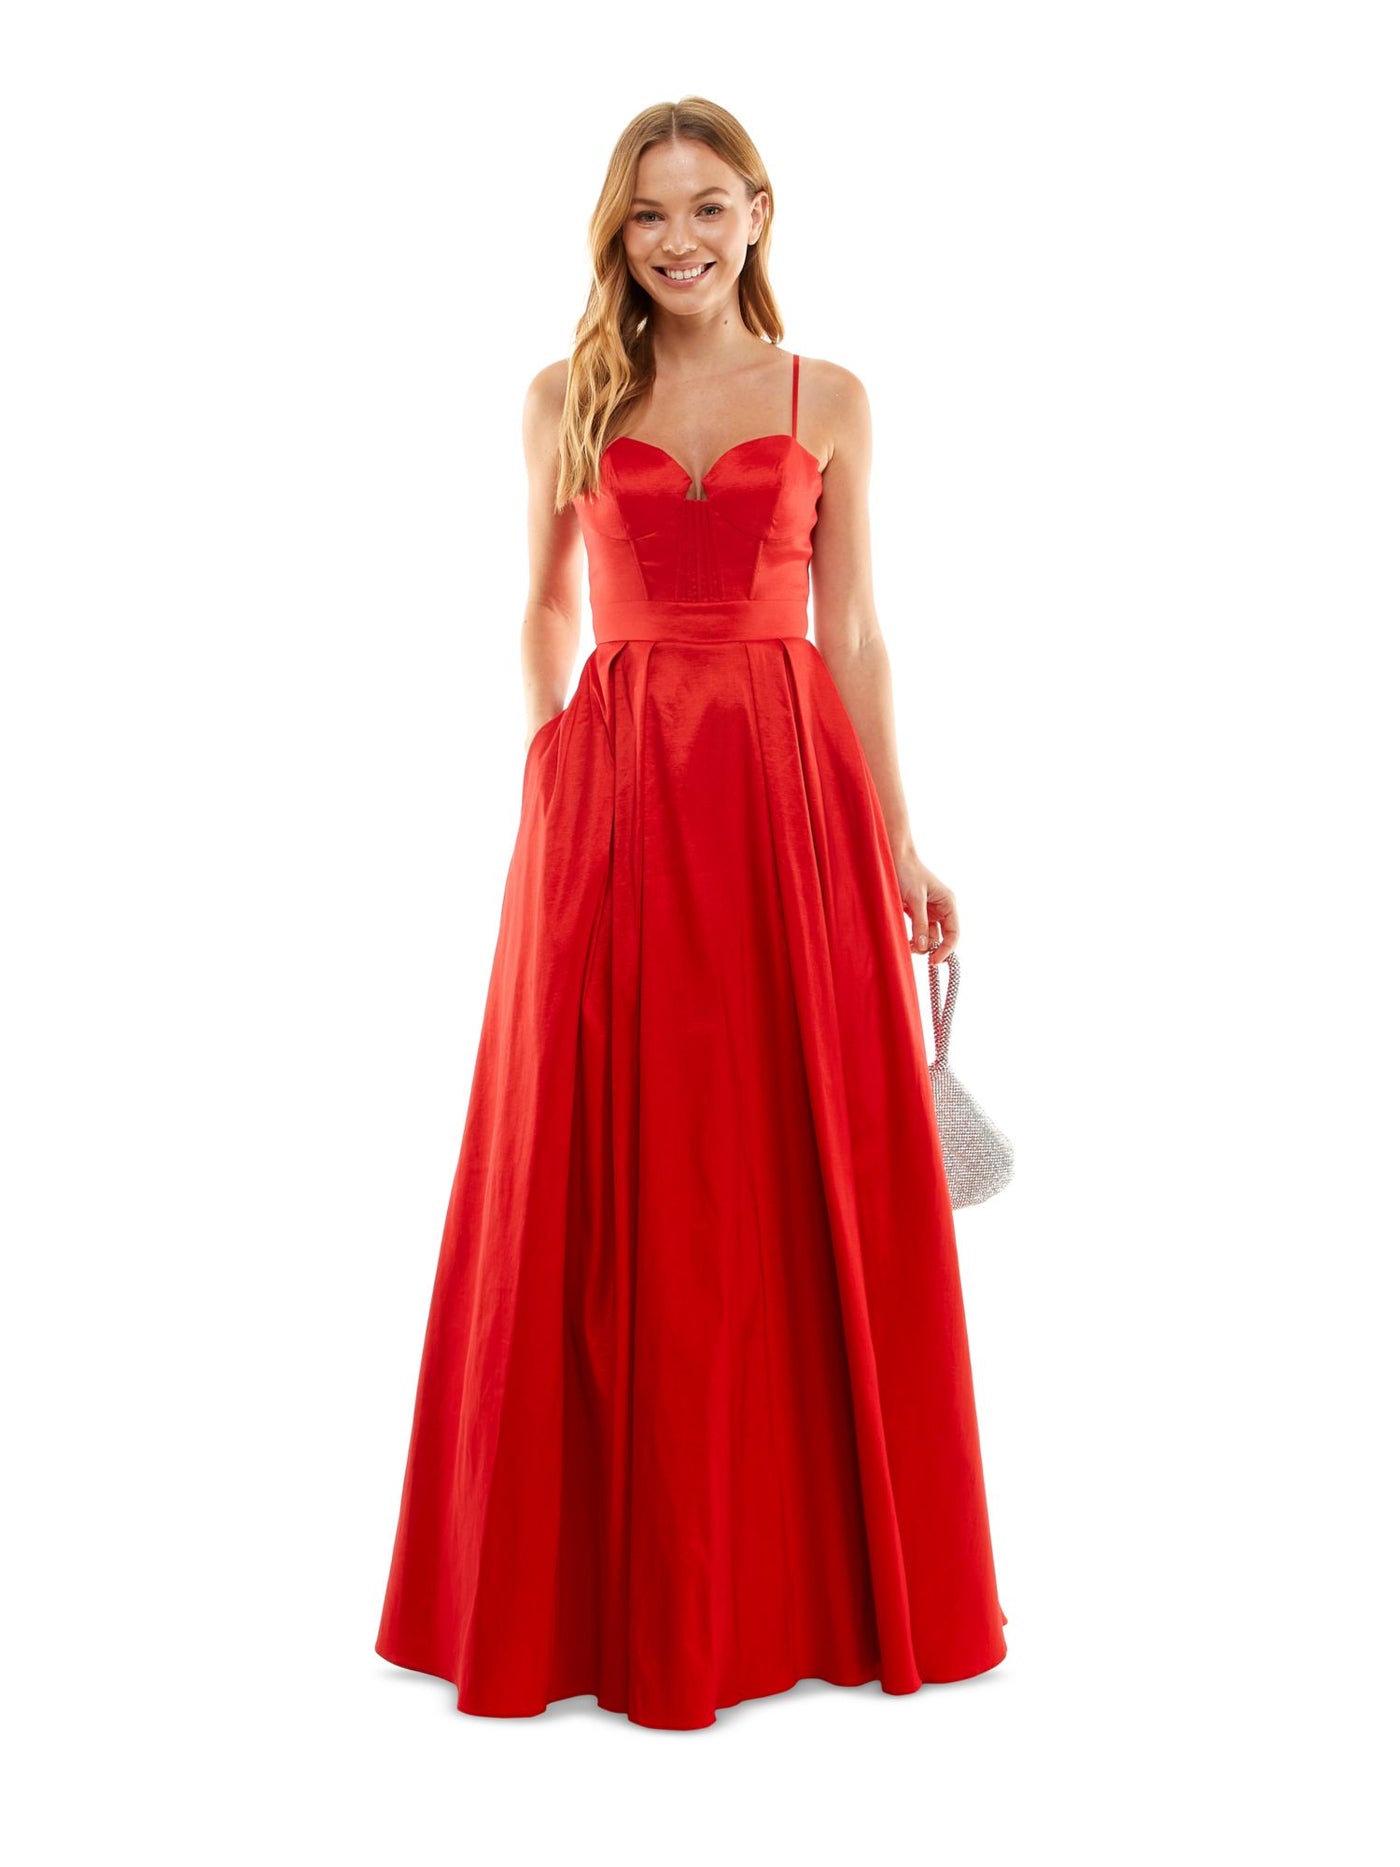 B DARLIN Womens Red Zippered Pleated Boned Corset Pocketed Lined Spaghetti Strap Sweetheart Neckline Full-Length Prom Gown Dress Juniors 7\8